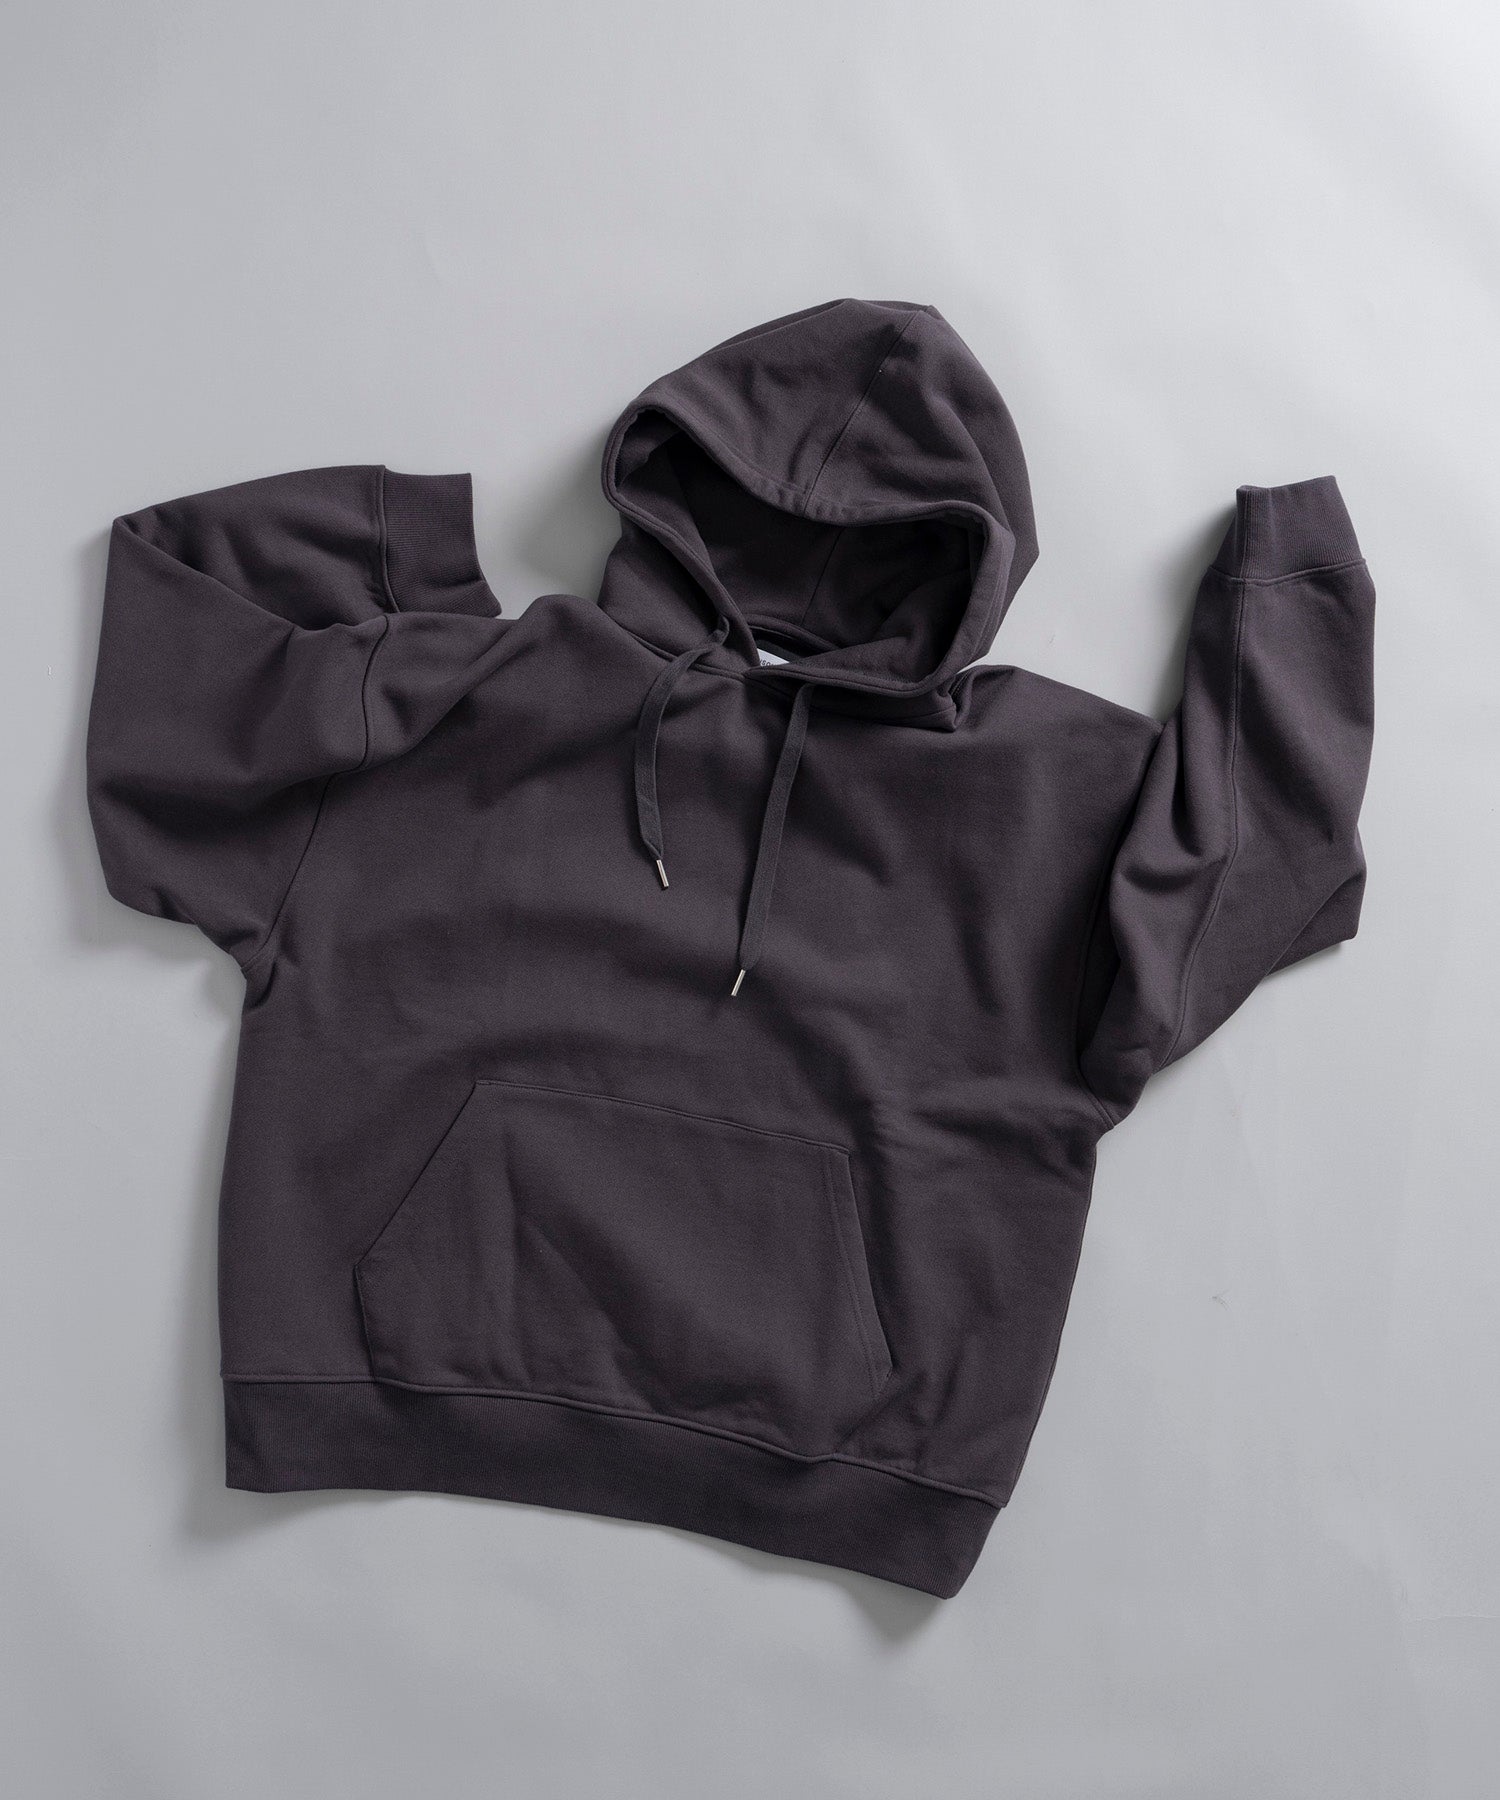 【24AW PRE-ORDER】【ONE-MILE WEAR】Prime-Over Pullover Sweat Hoodie